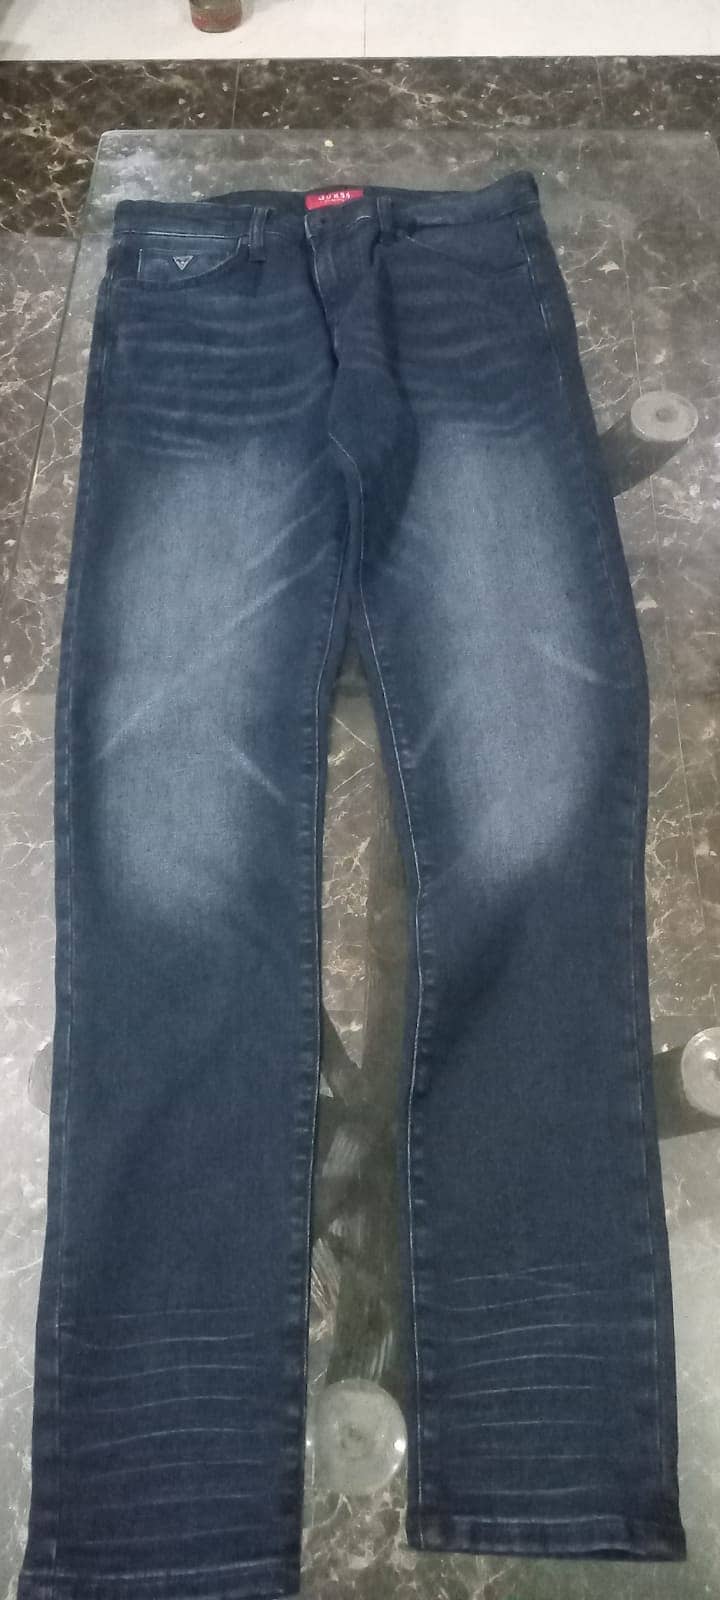 GUESS Stretch Denim Skinny jeans on wholesale 1